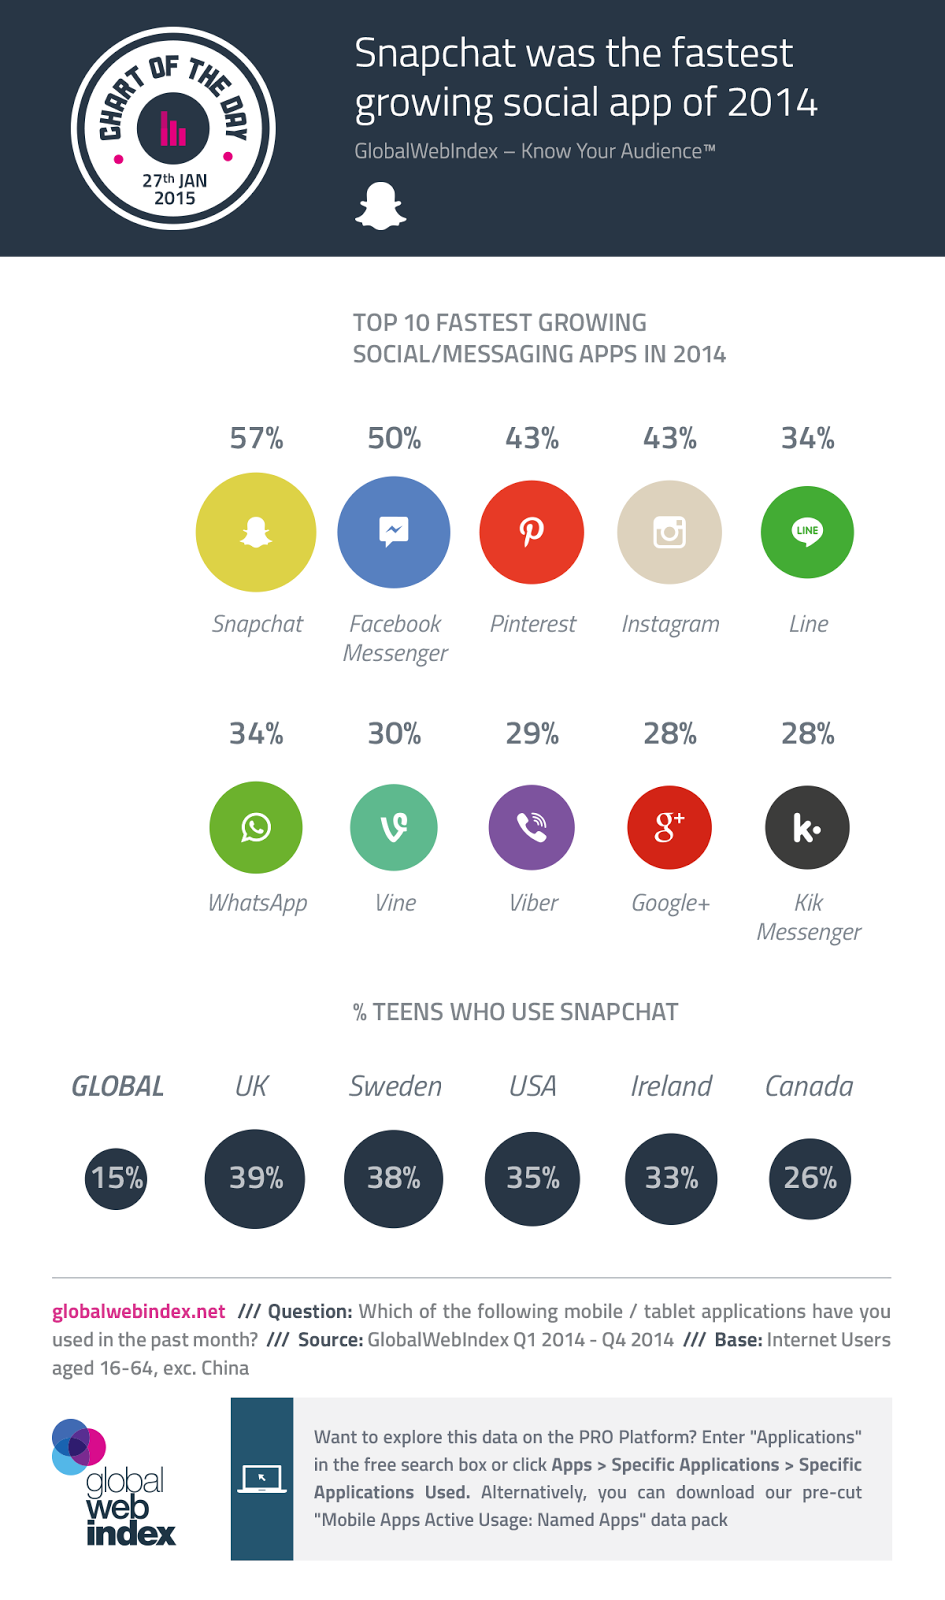 For those of you who want to see how your favorite messaging/social apps faired in the past year, the team at GlobalWebIndex has provided all the stats we need to know which apps have done the best in 2014: Facebook rules the app space, but snapchat is growing the fastest.